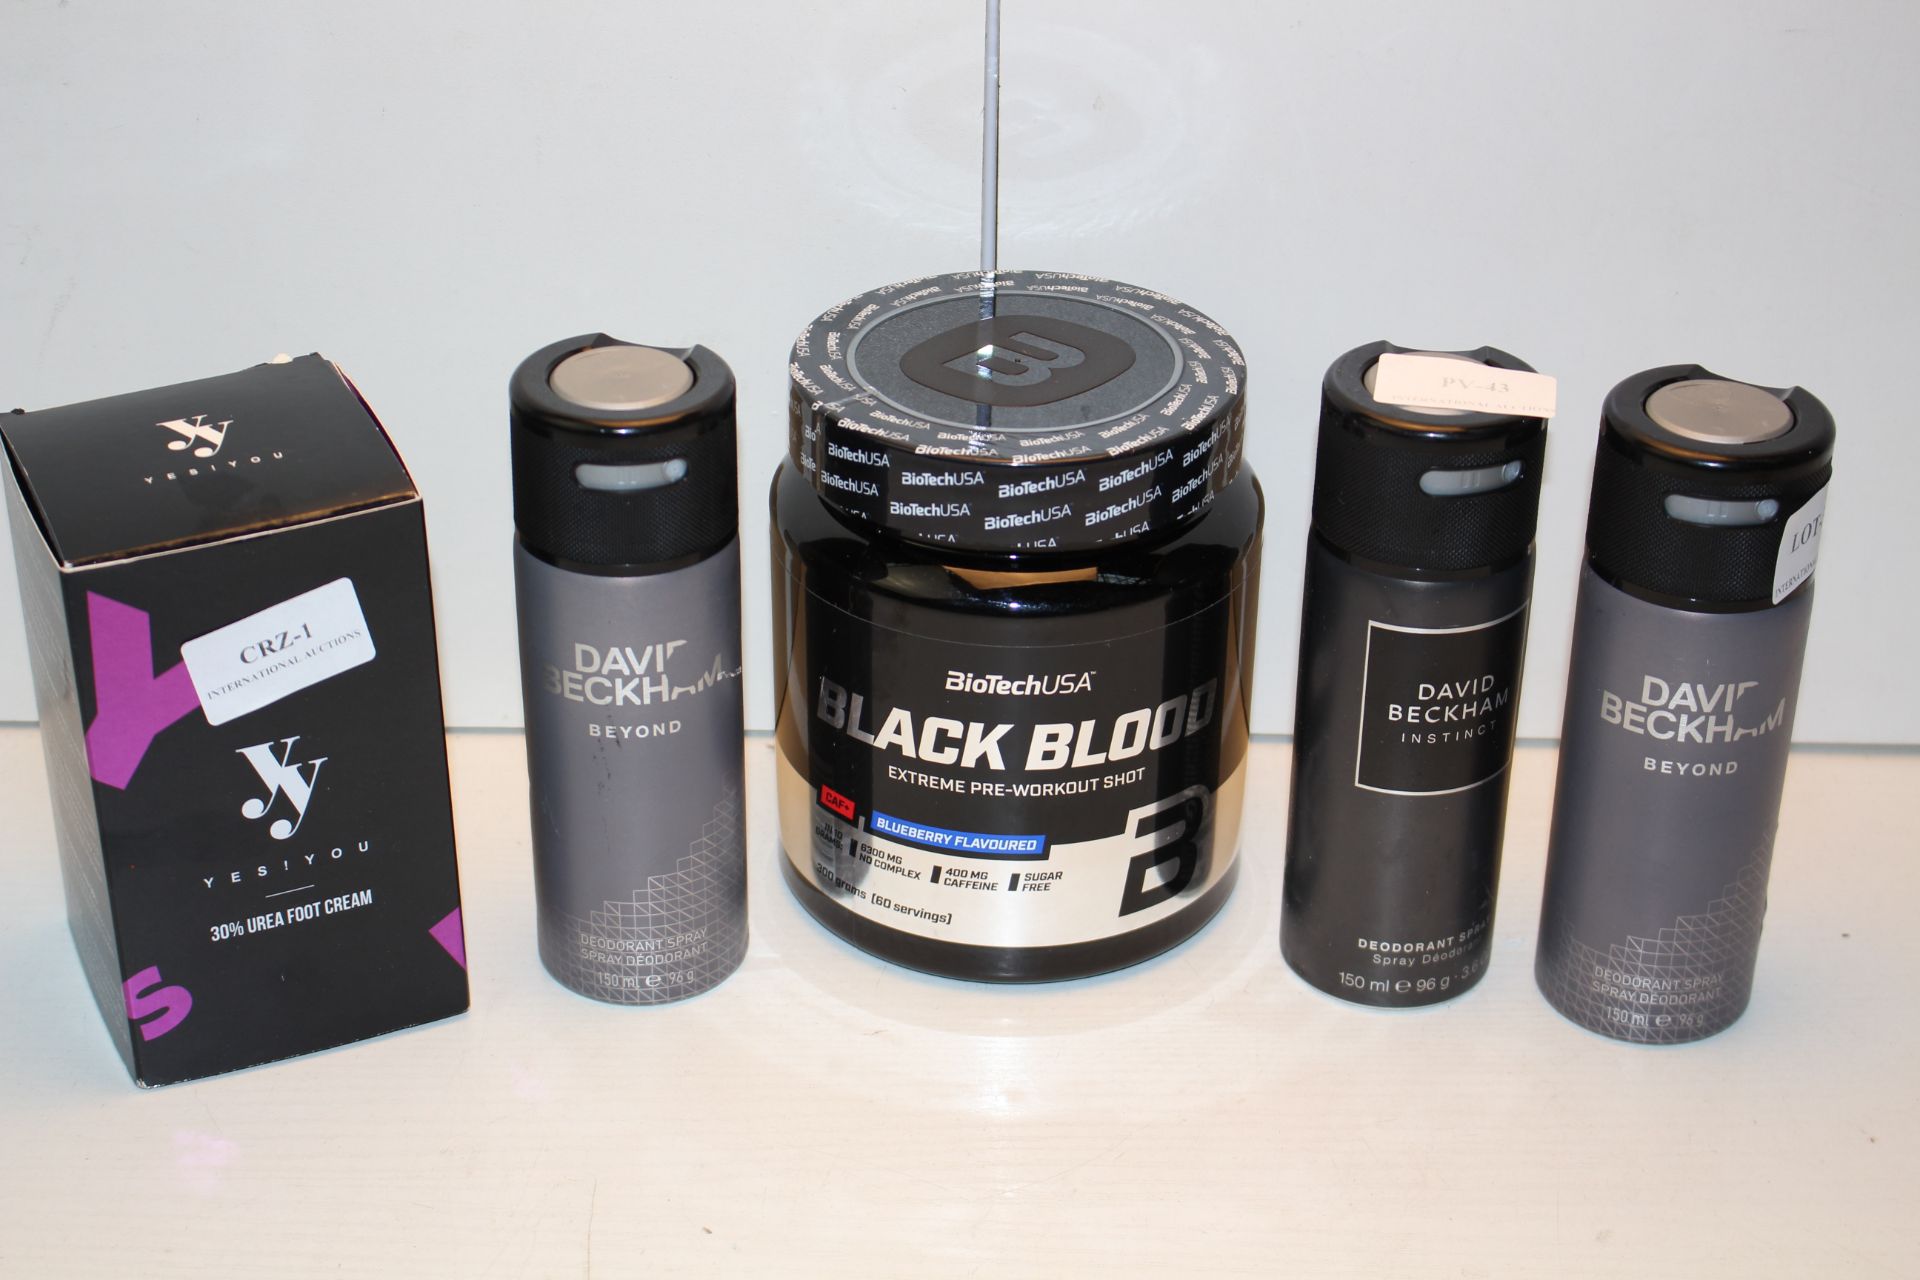 5X ASSORTED ITEMS TO INCLUDE BLACK BLOOD EXTREME-PRE WORKOUT SHOT, DAVID BECKHAM DEODORANT &